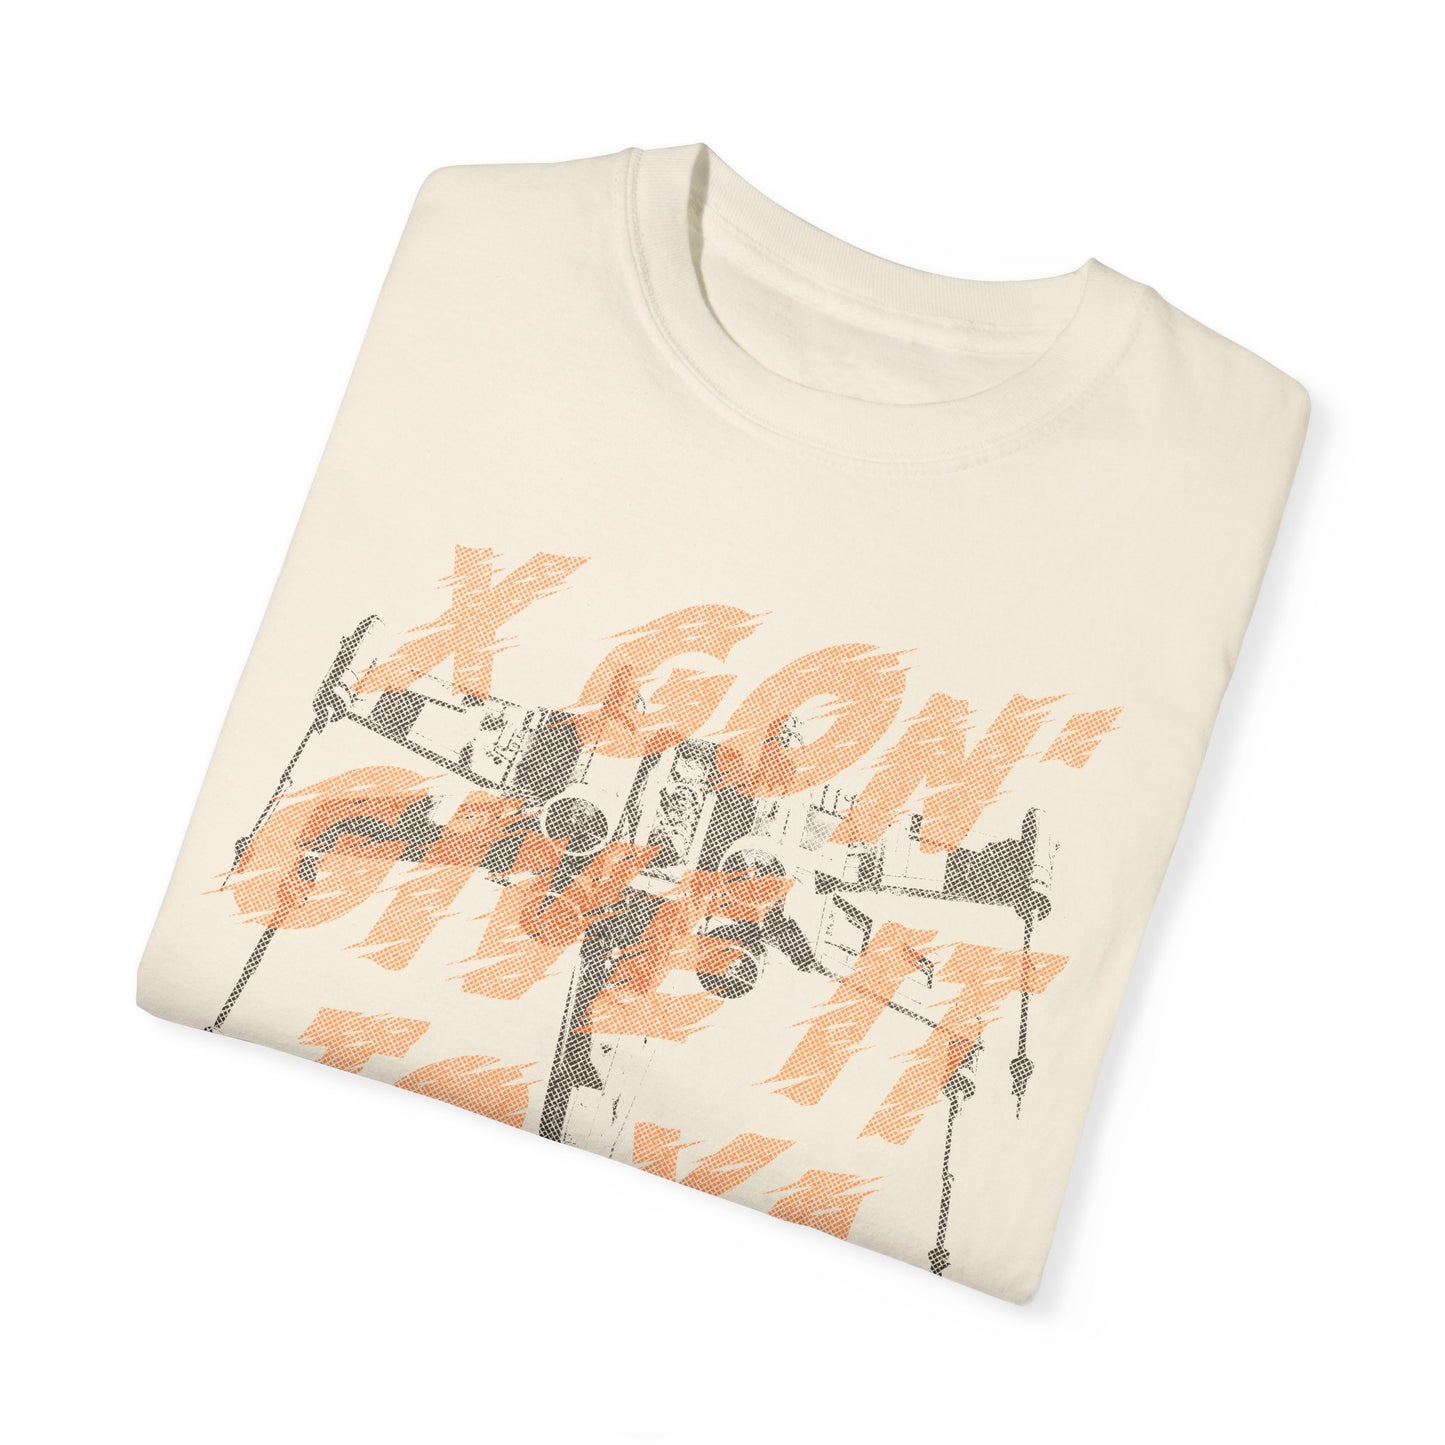 X-Wing Gon' Give It To Ya t-shirt